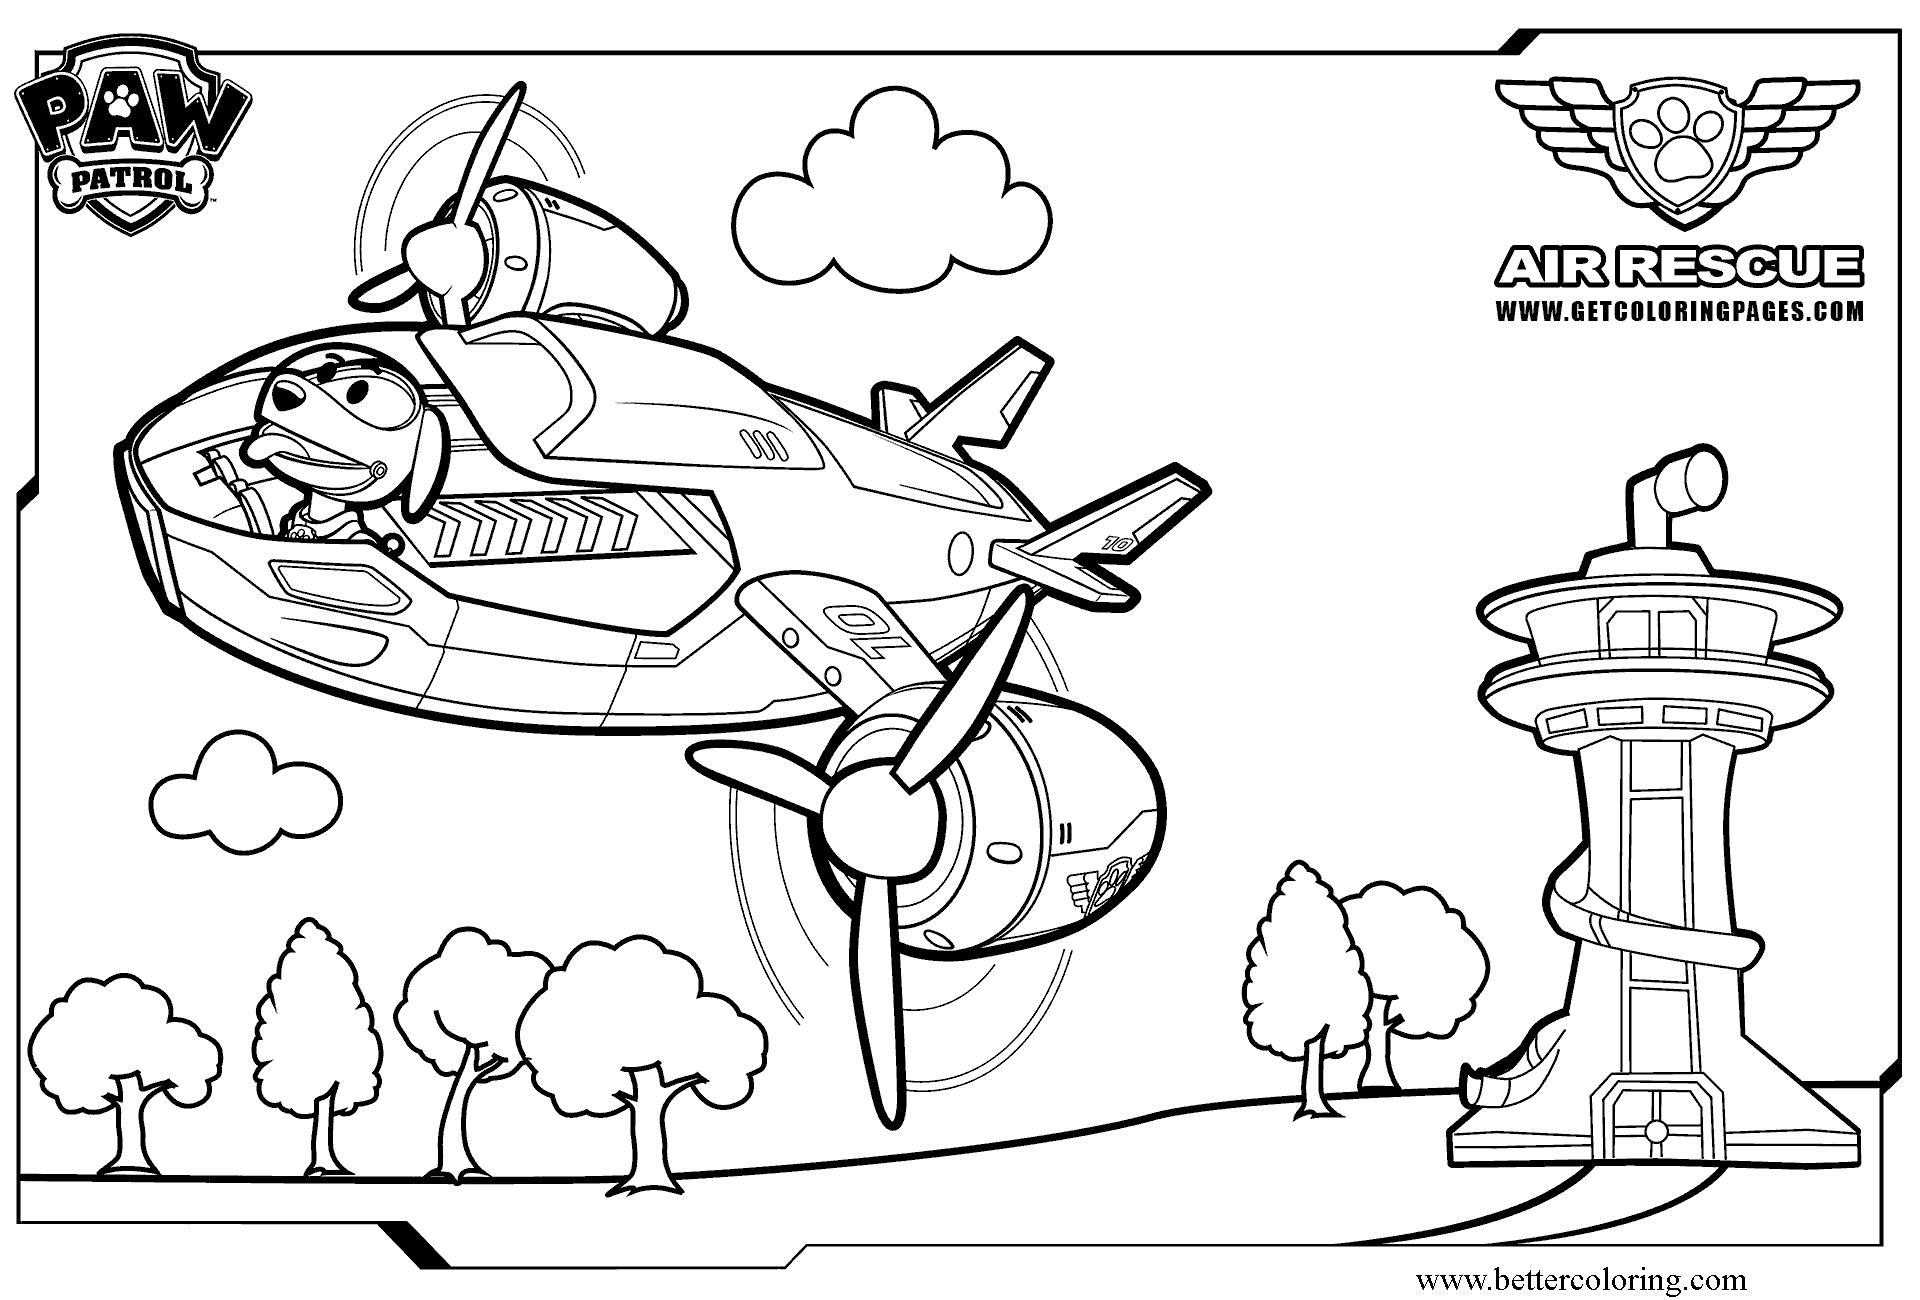 Free Paw Patrol Air Rescue Coloring Pages printable